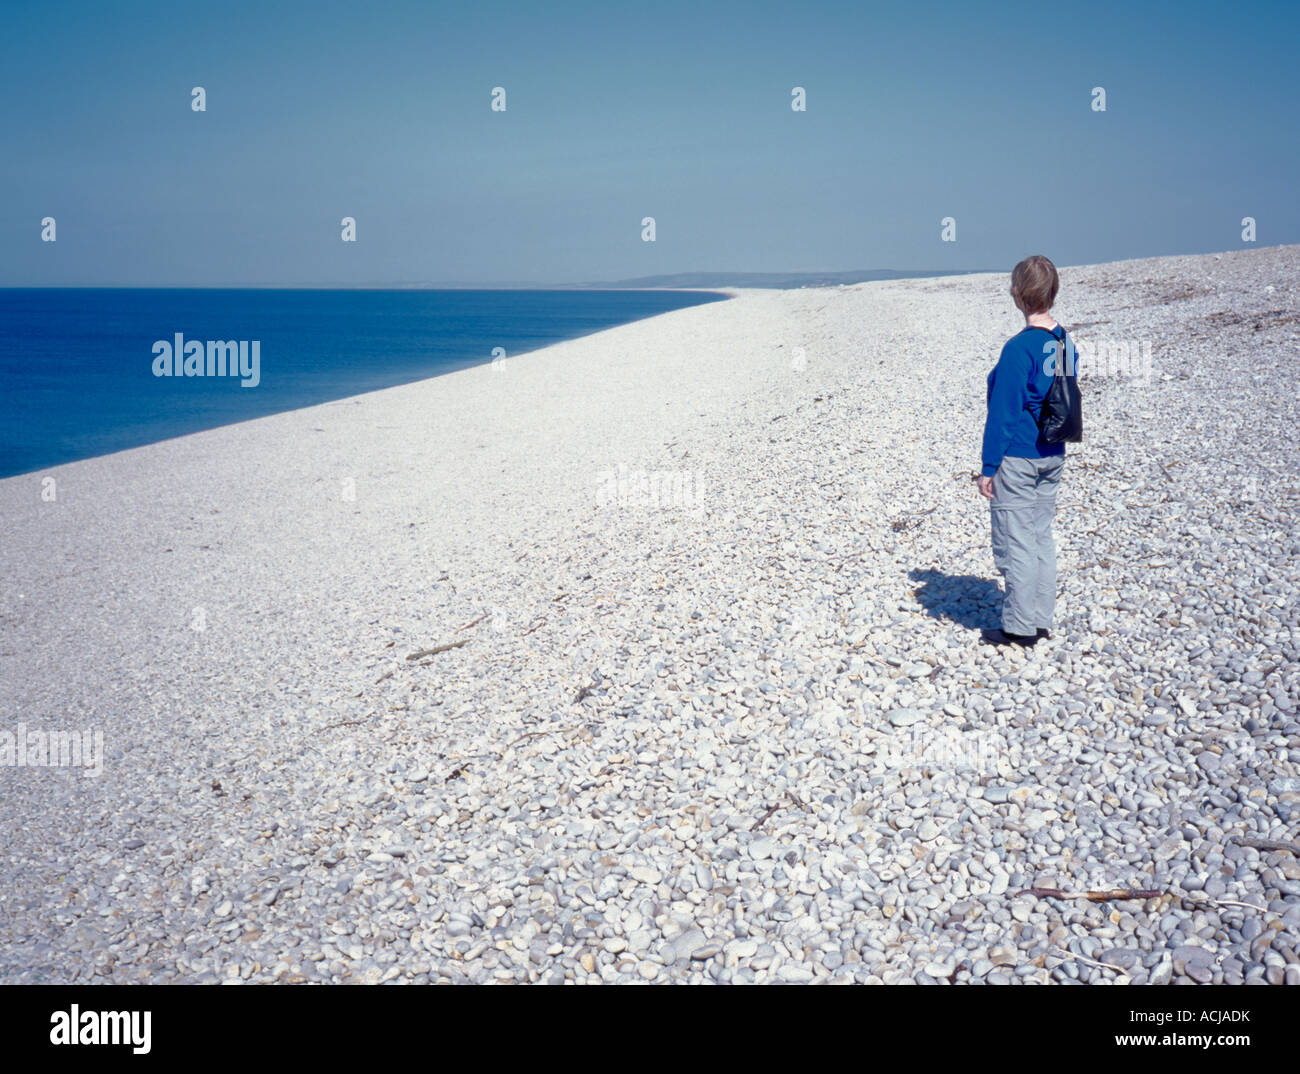 Looking at Chesil Beach, view north west at Chiswell, Portland, Dorset, England, UK. Stock Photo